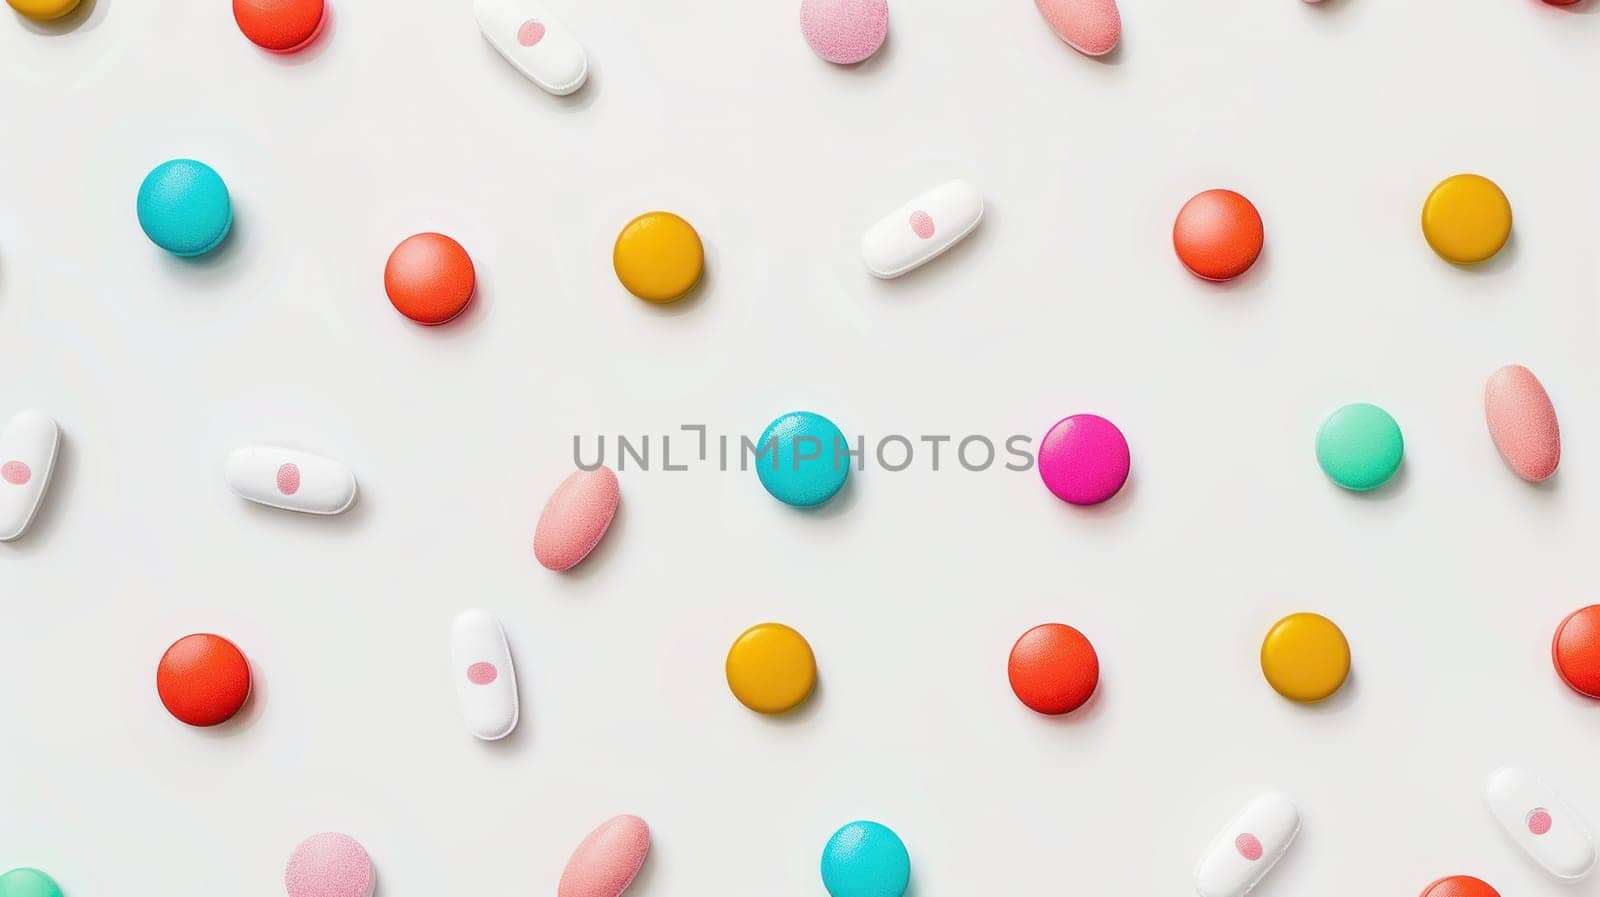 Colorful candies arranged in top view flat lay on white background for sweet treats and celebrations